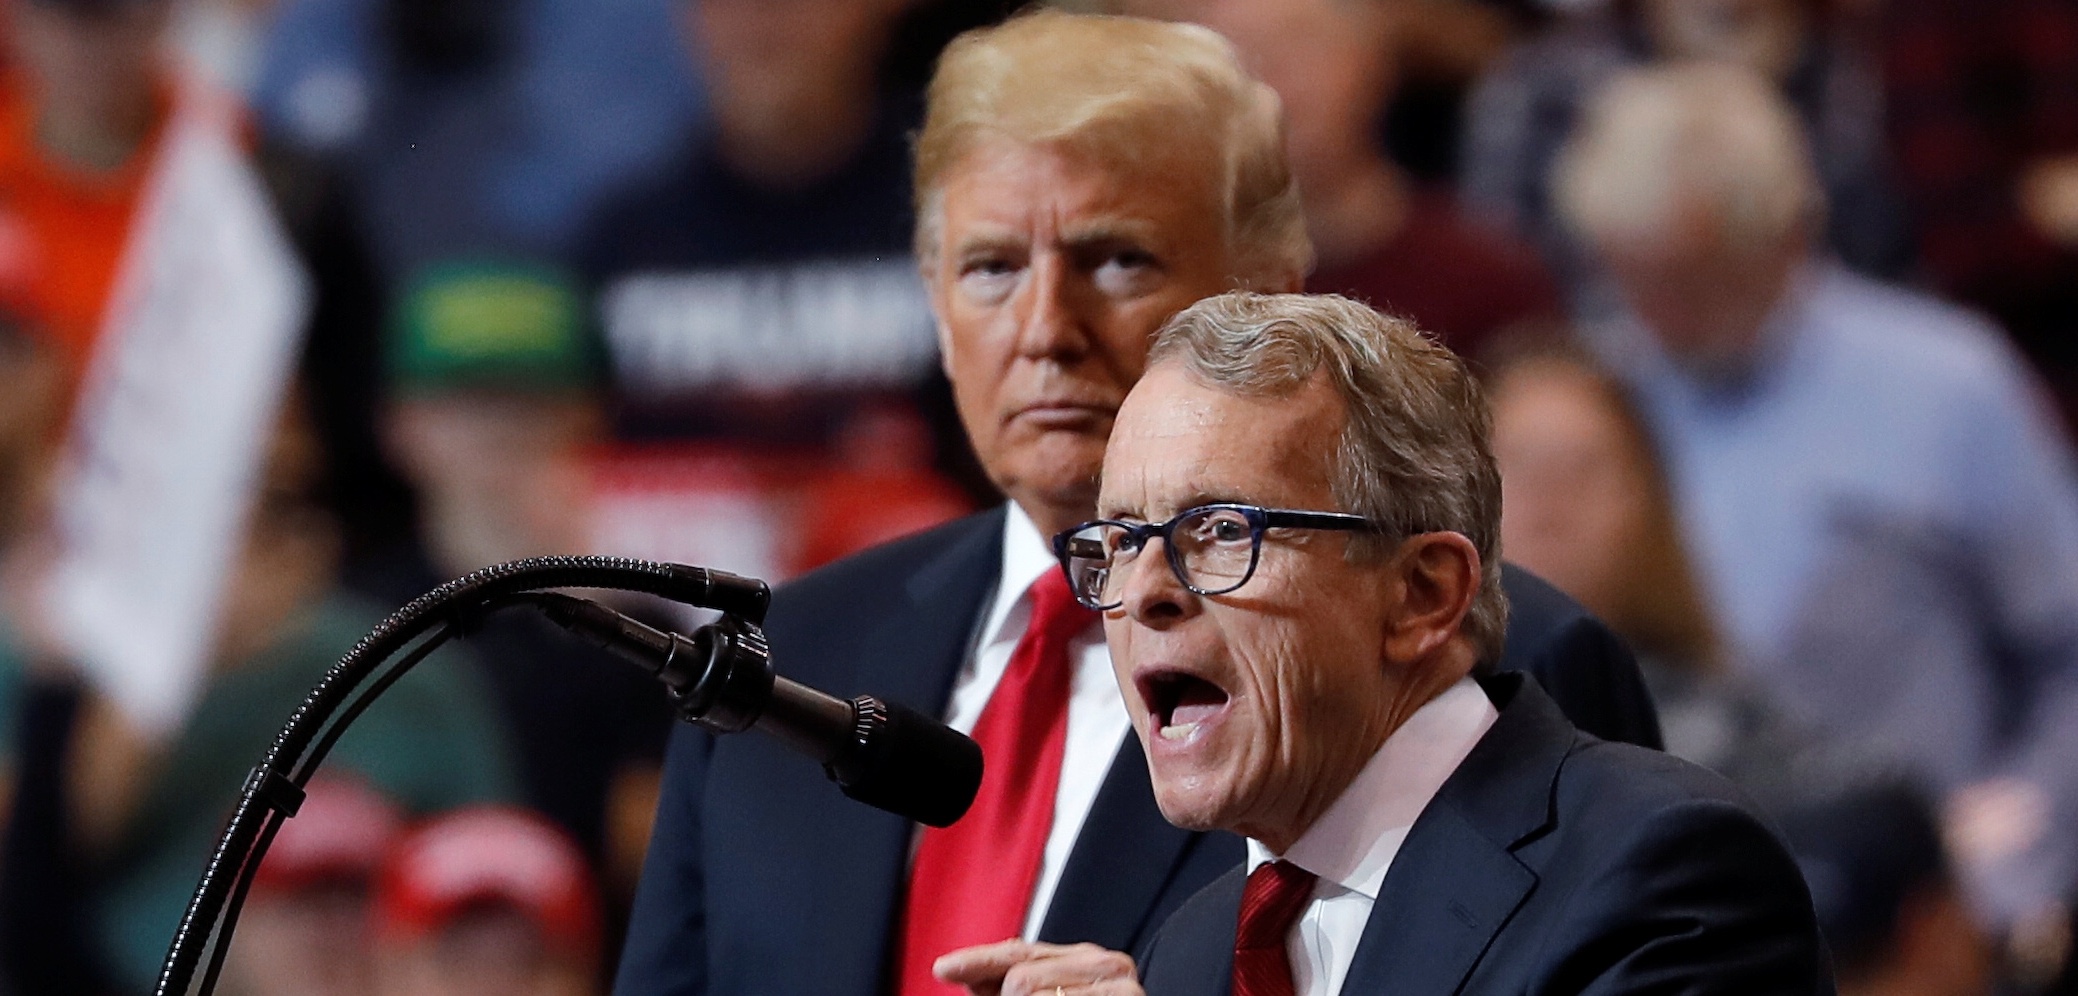 U.S. President Donald Trump listens as Ohio gubernatorial nominee and Ohio Attorney General Mike Dewine speaks during a campaign rally in Cleveland, Ohio., U.S., November 5, 2018. REUTERS/Carlos Barria